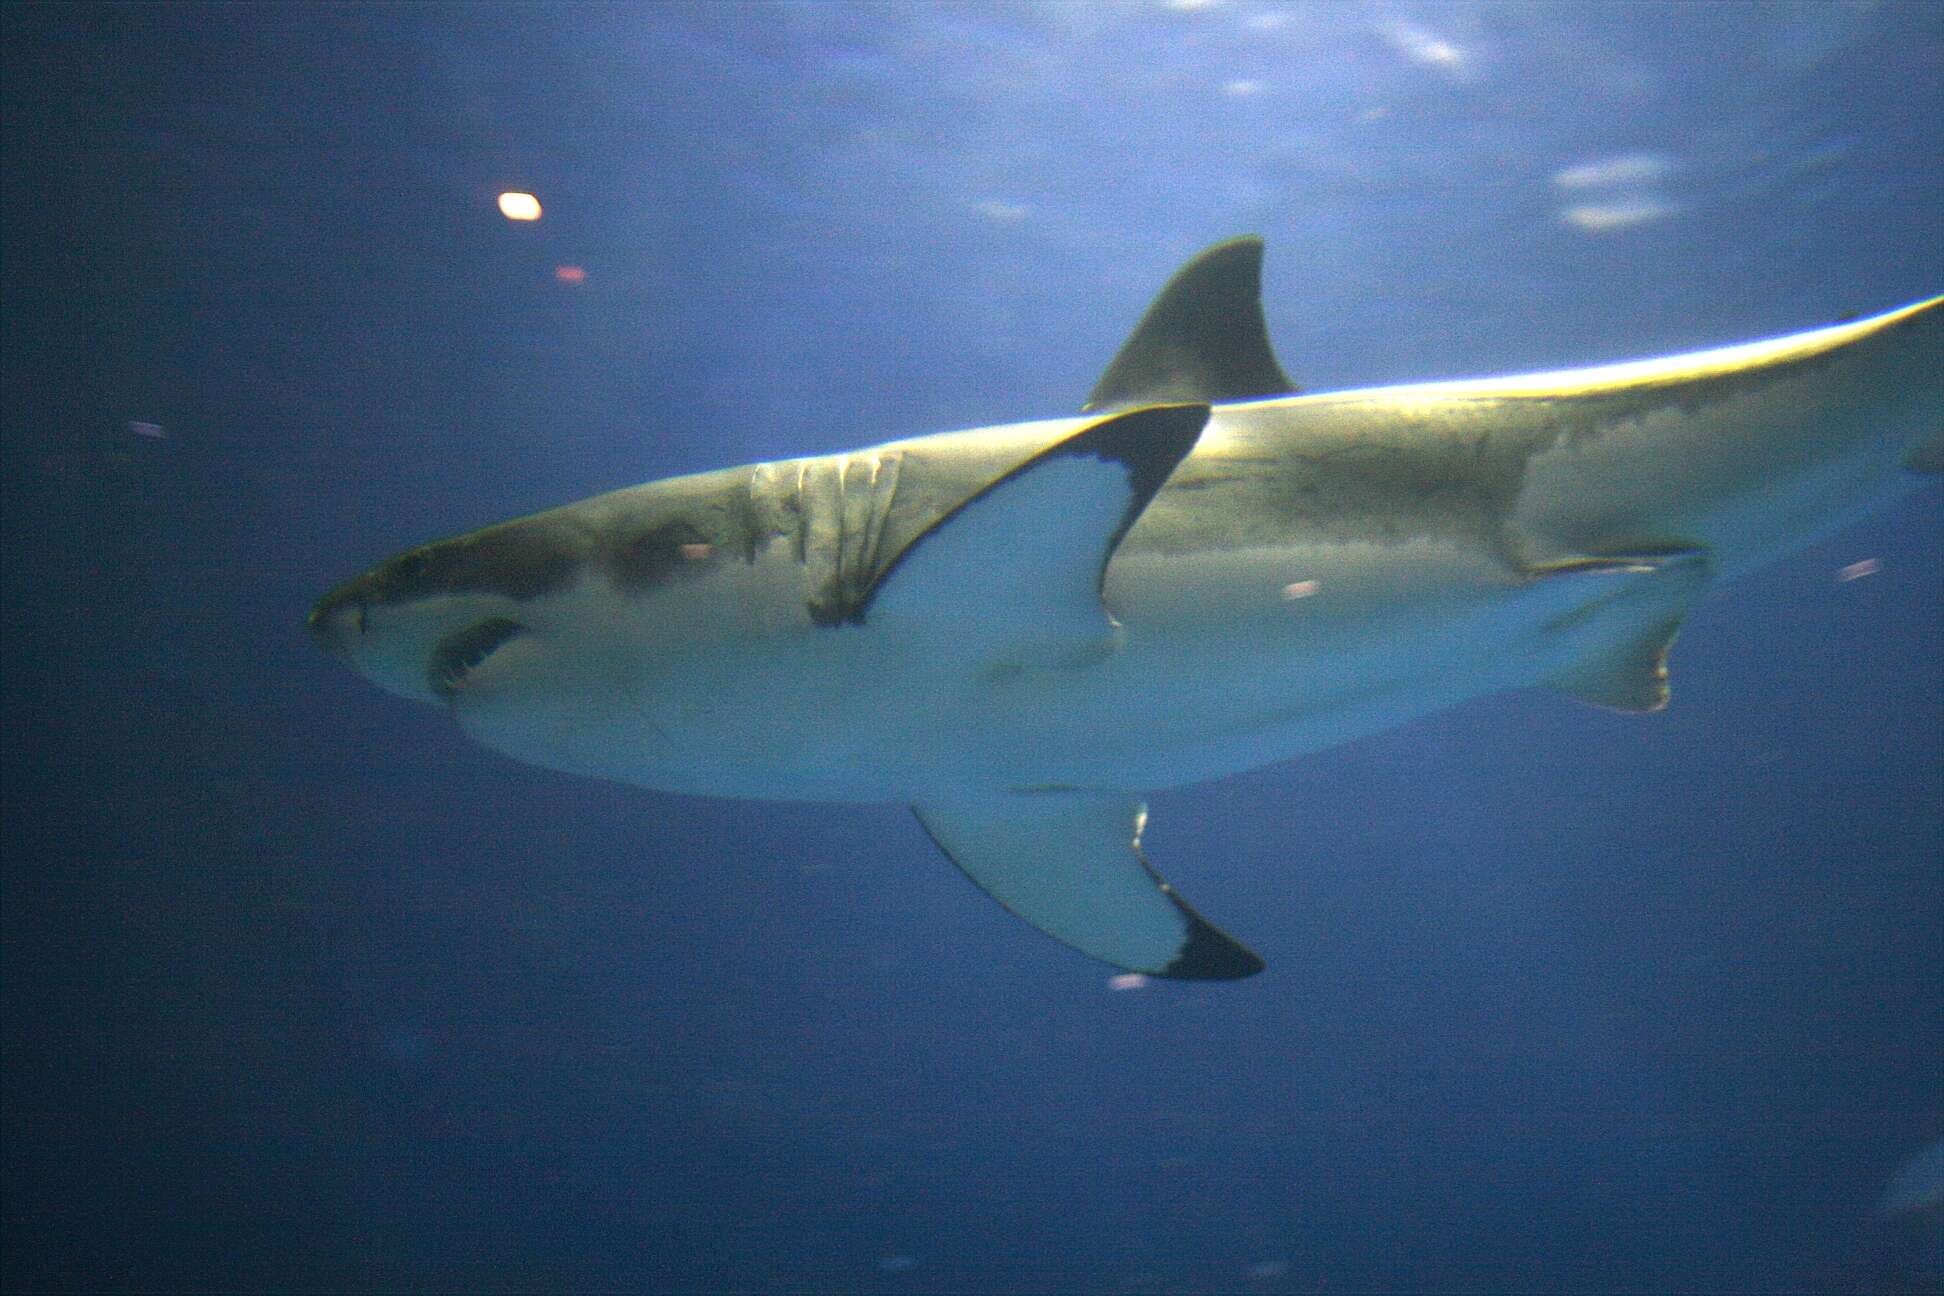 Image of Carcharodon